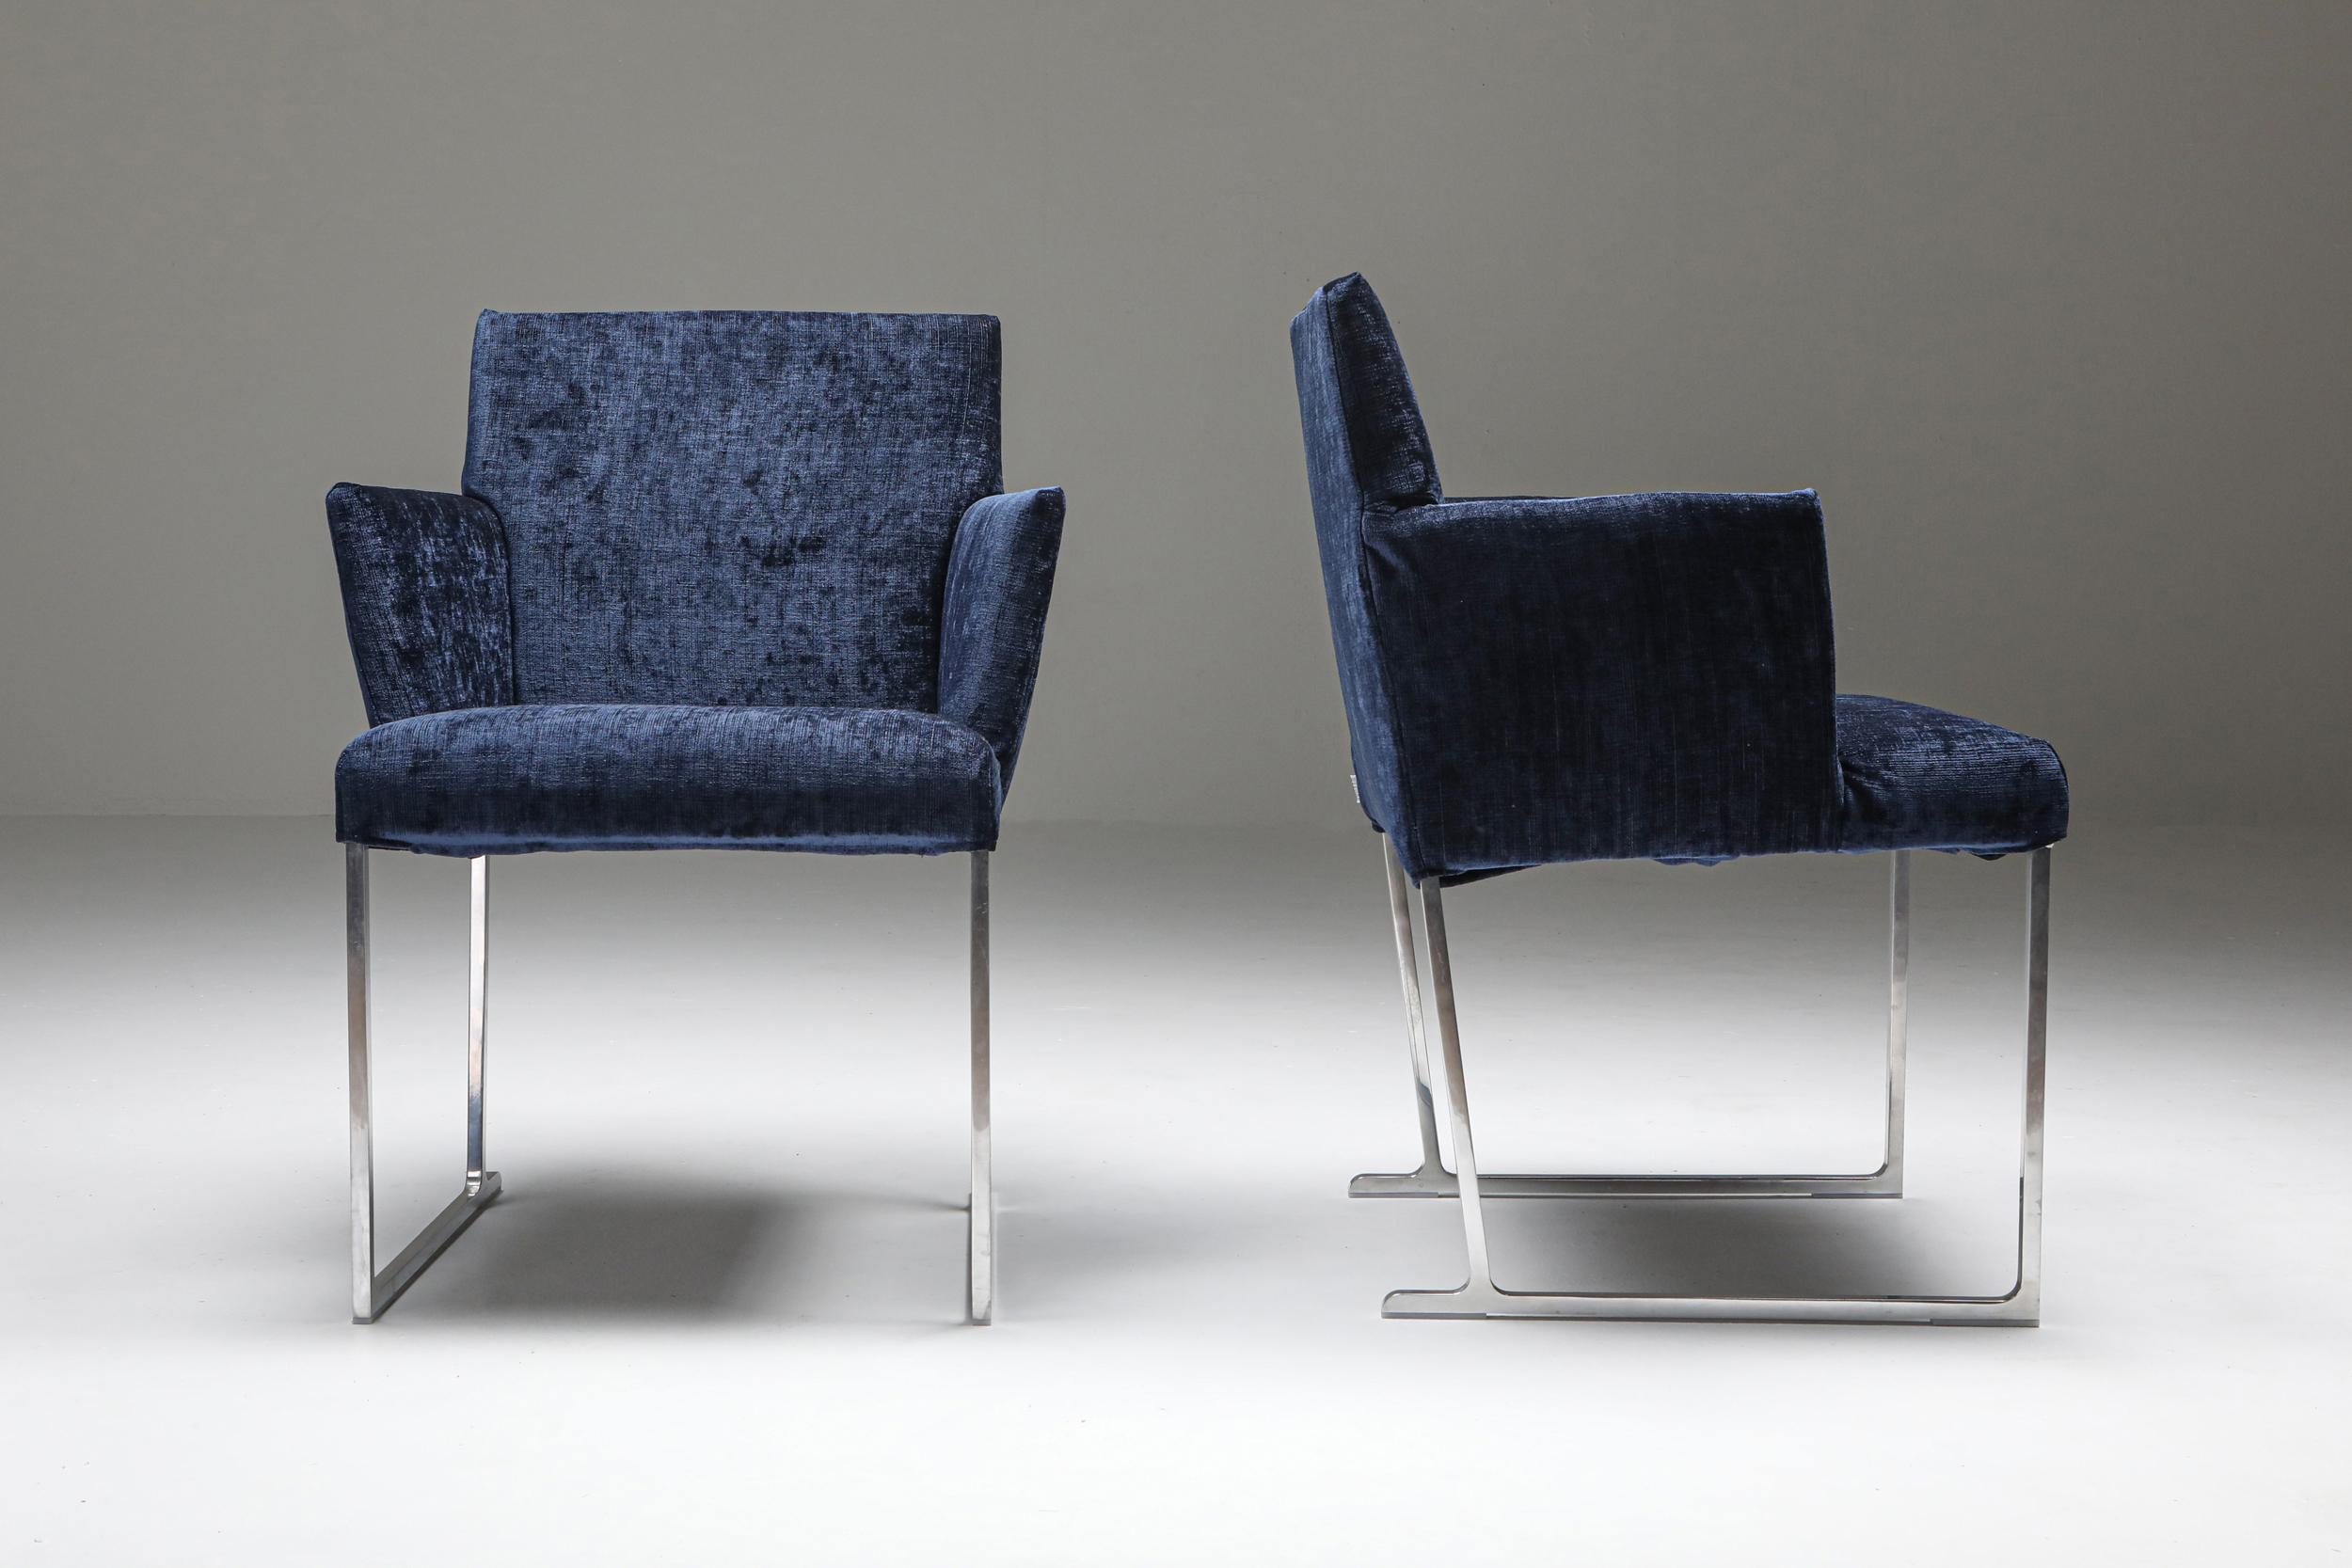 Solo Chairs by Antonio Citterio for B&B Italia, Italy, 2000s For Sale 1